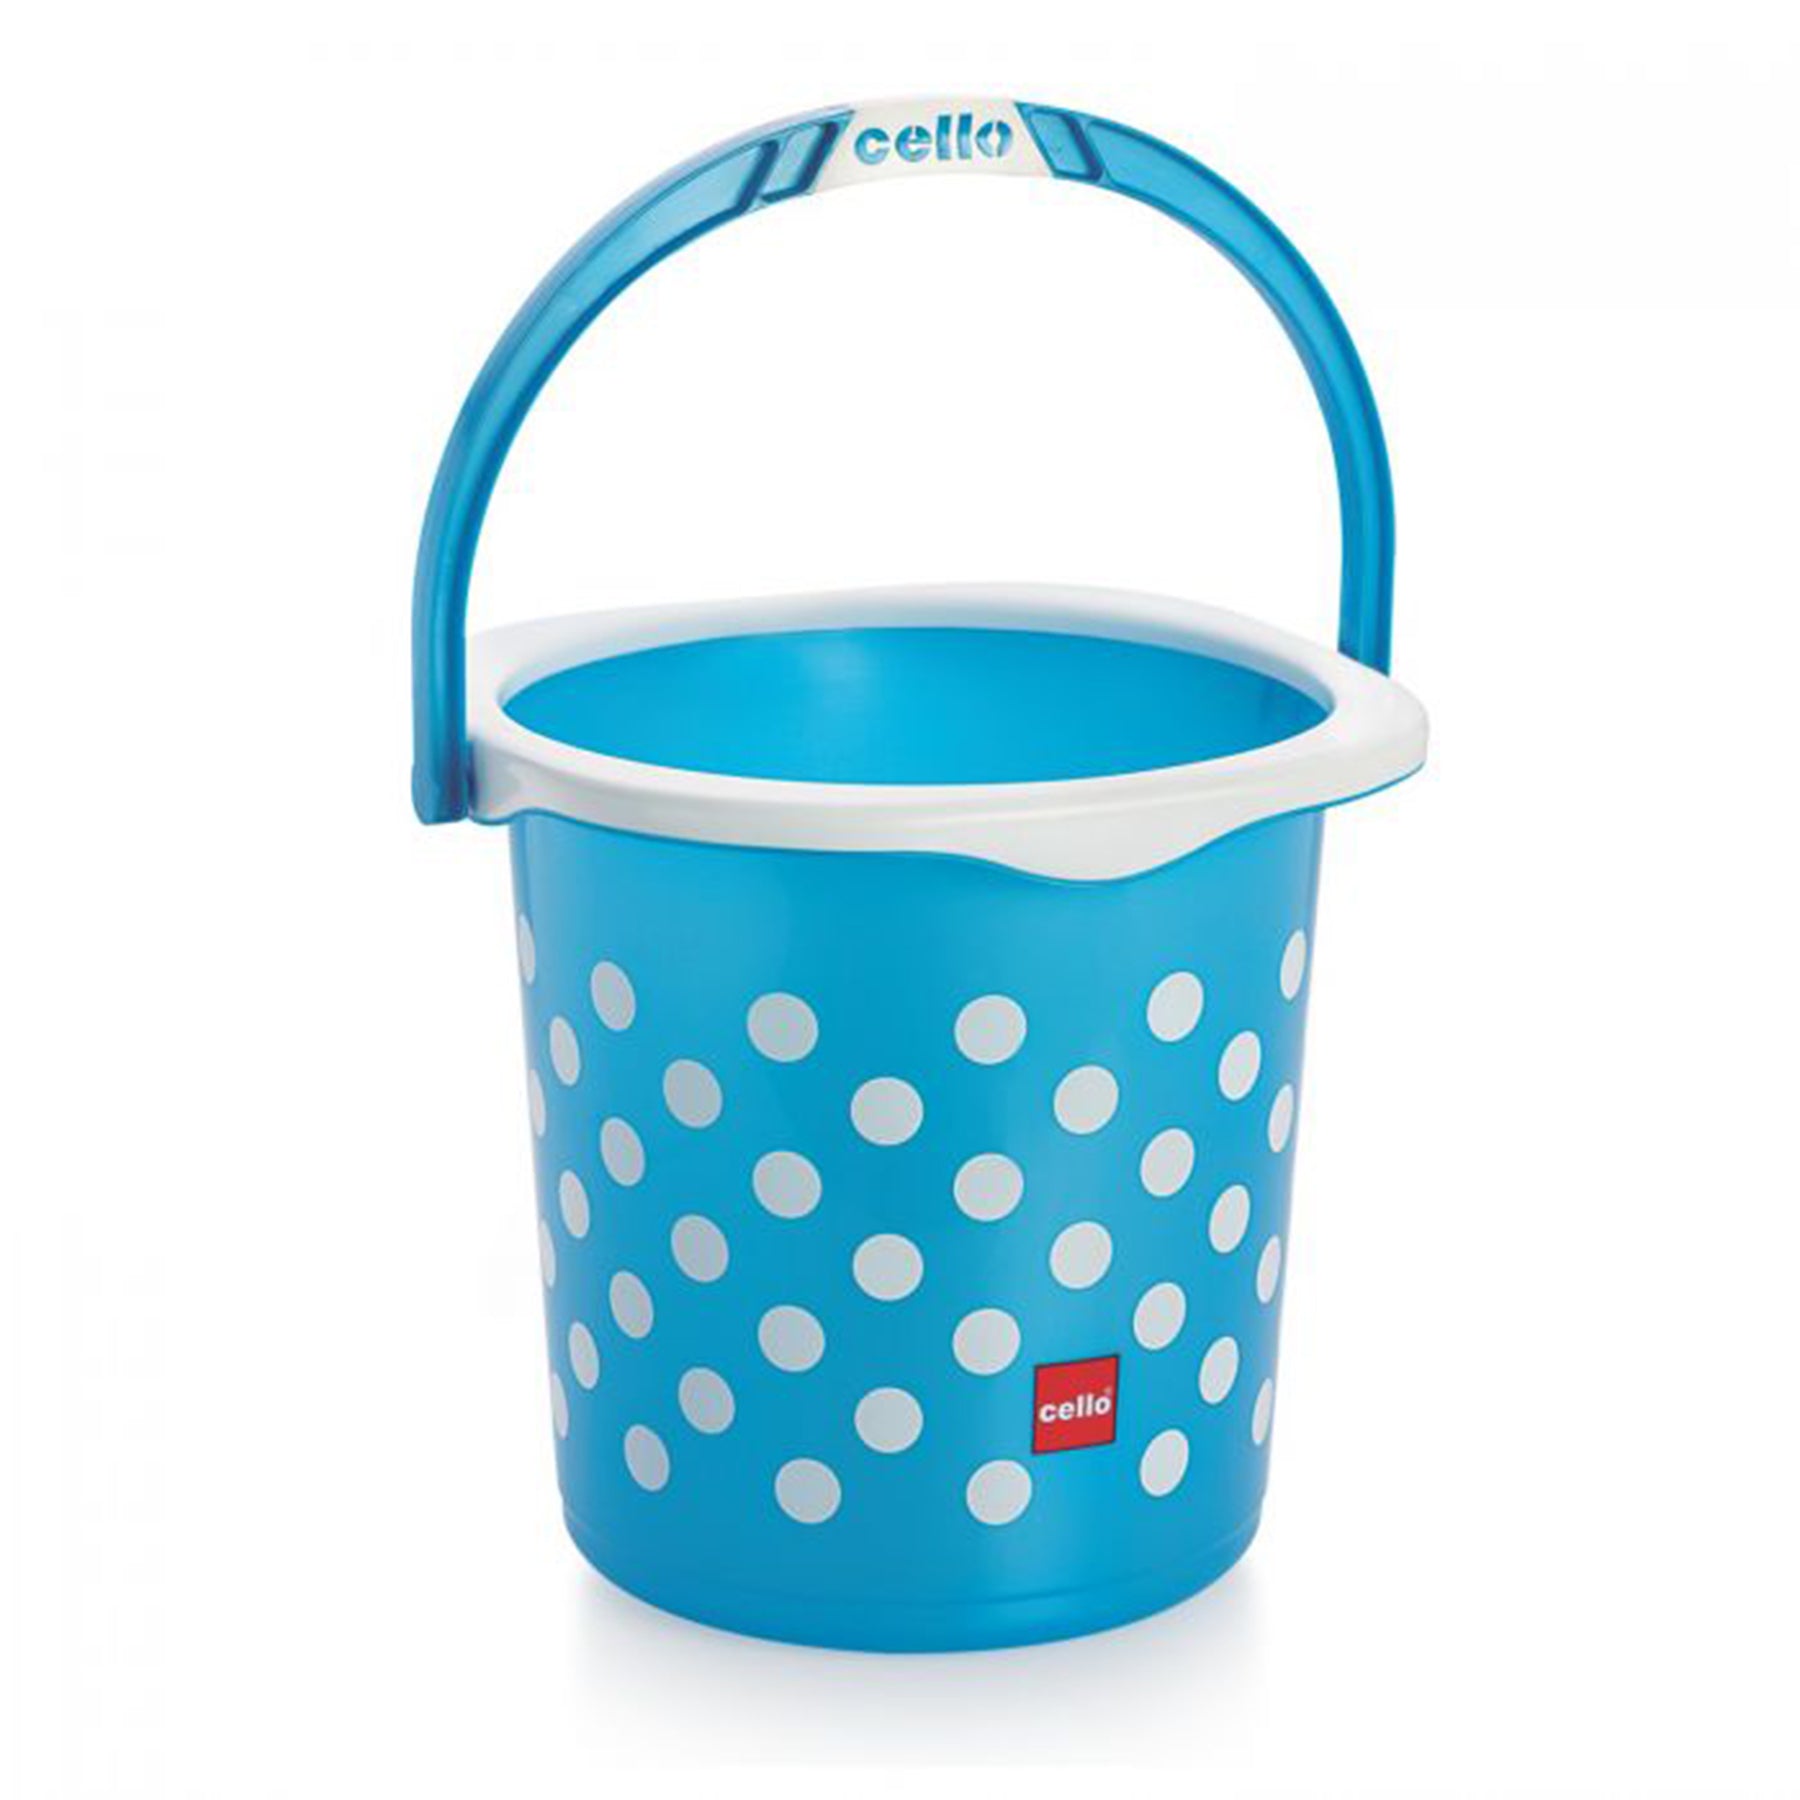 Cleaning Bucket with Handle - Blue Color